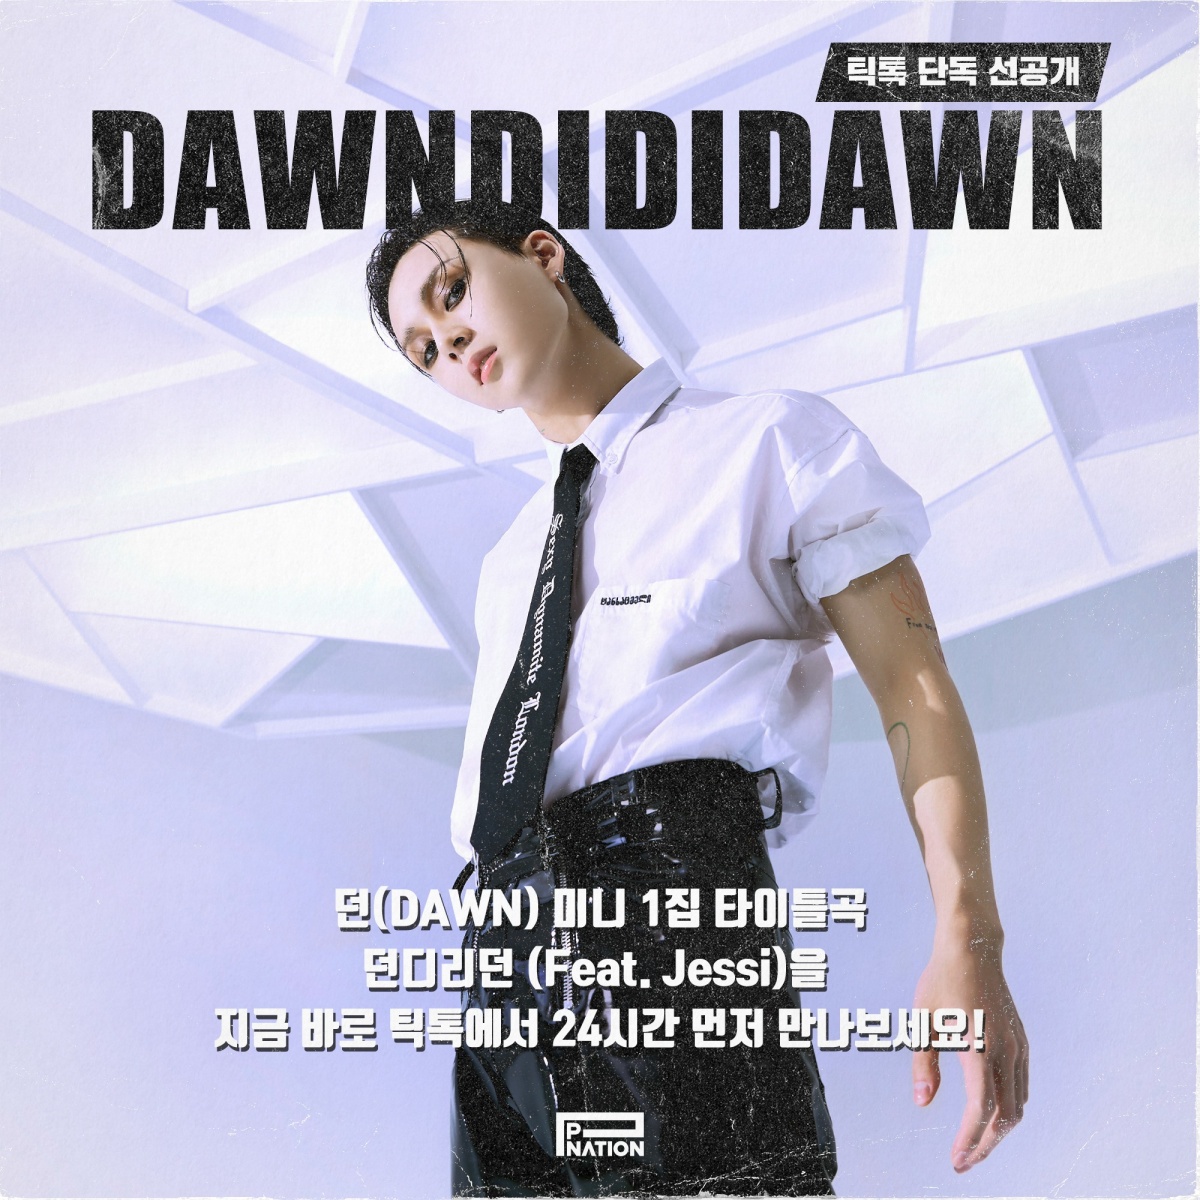 DAWN comeback after 1 year "I'm sorry and thankful to the fans for waiting"